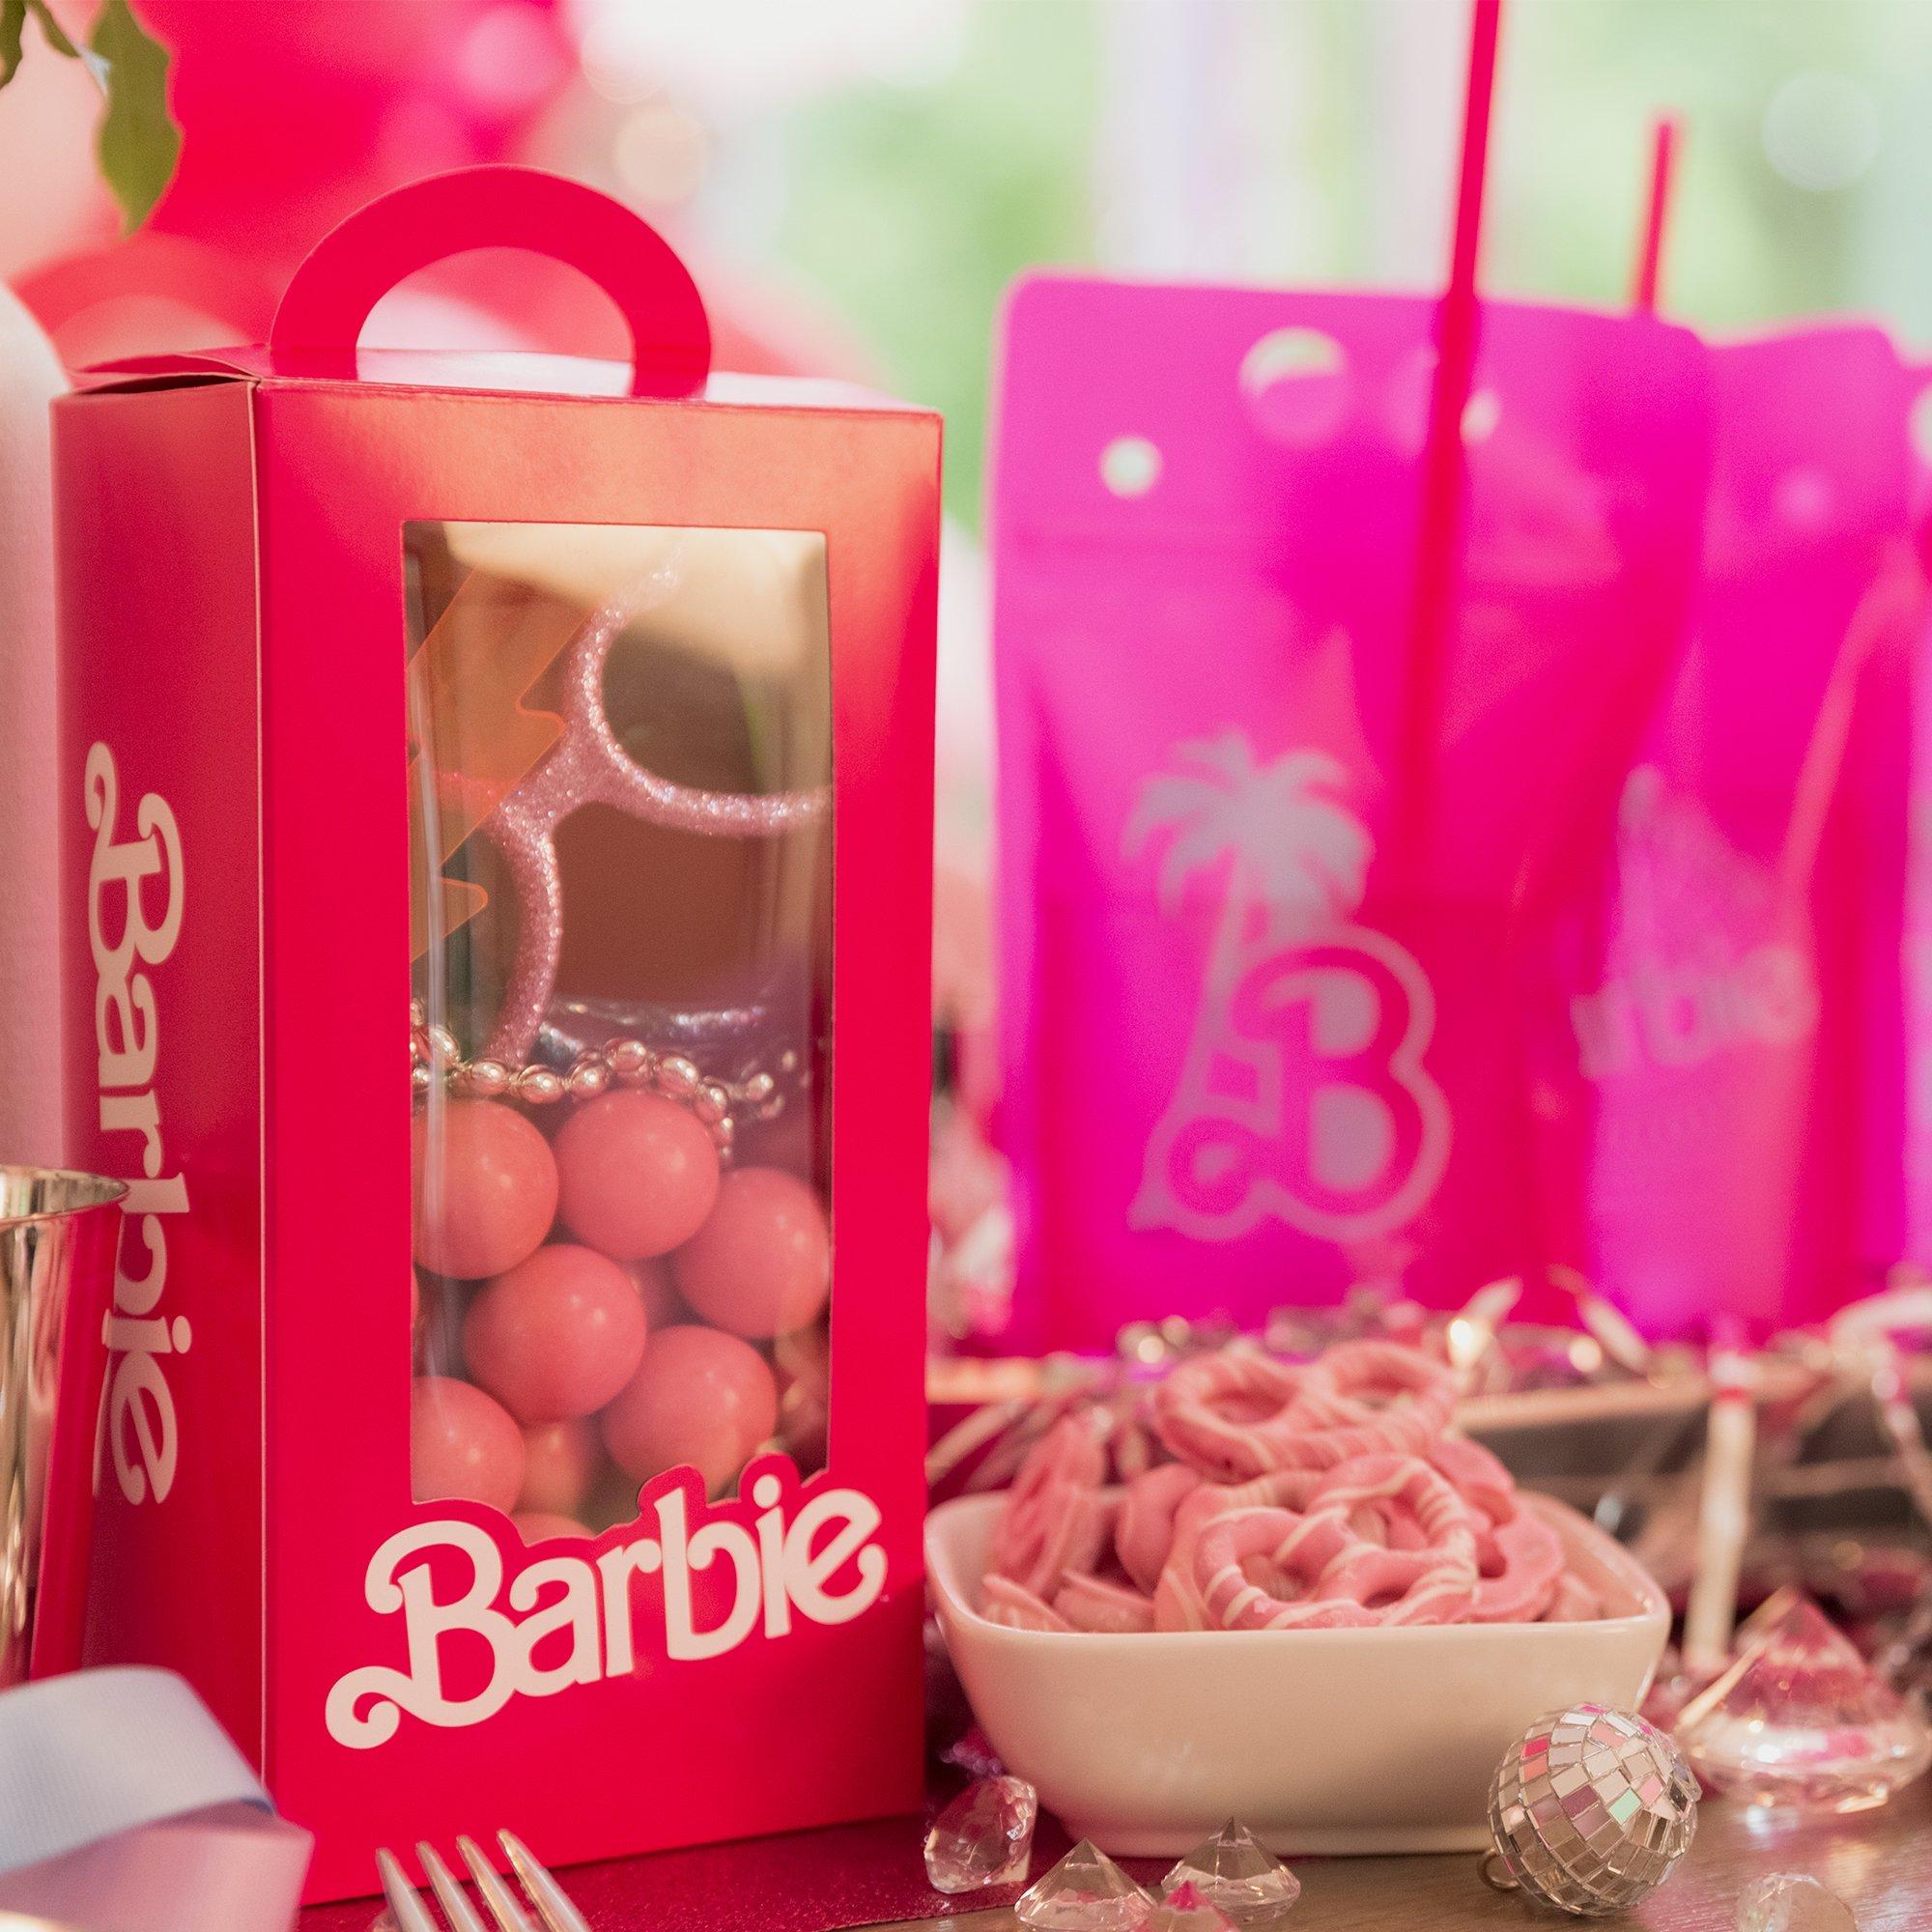 Barbie dolls. Gift boxes and bags set. LV